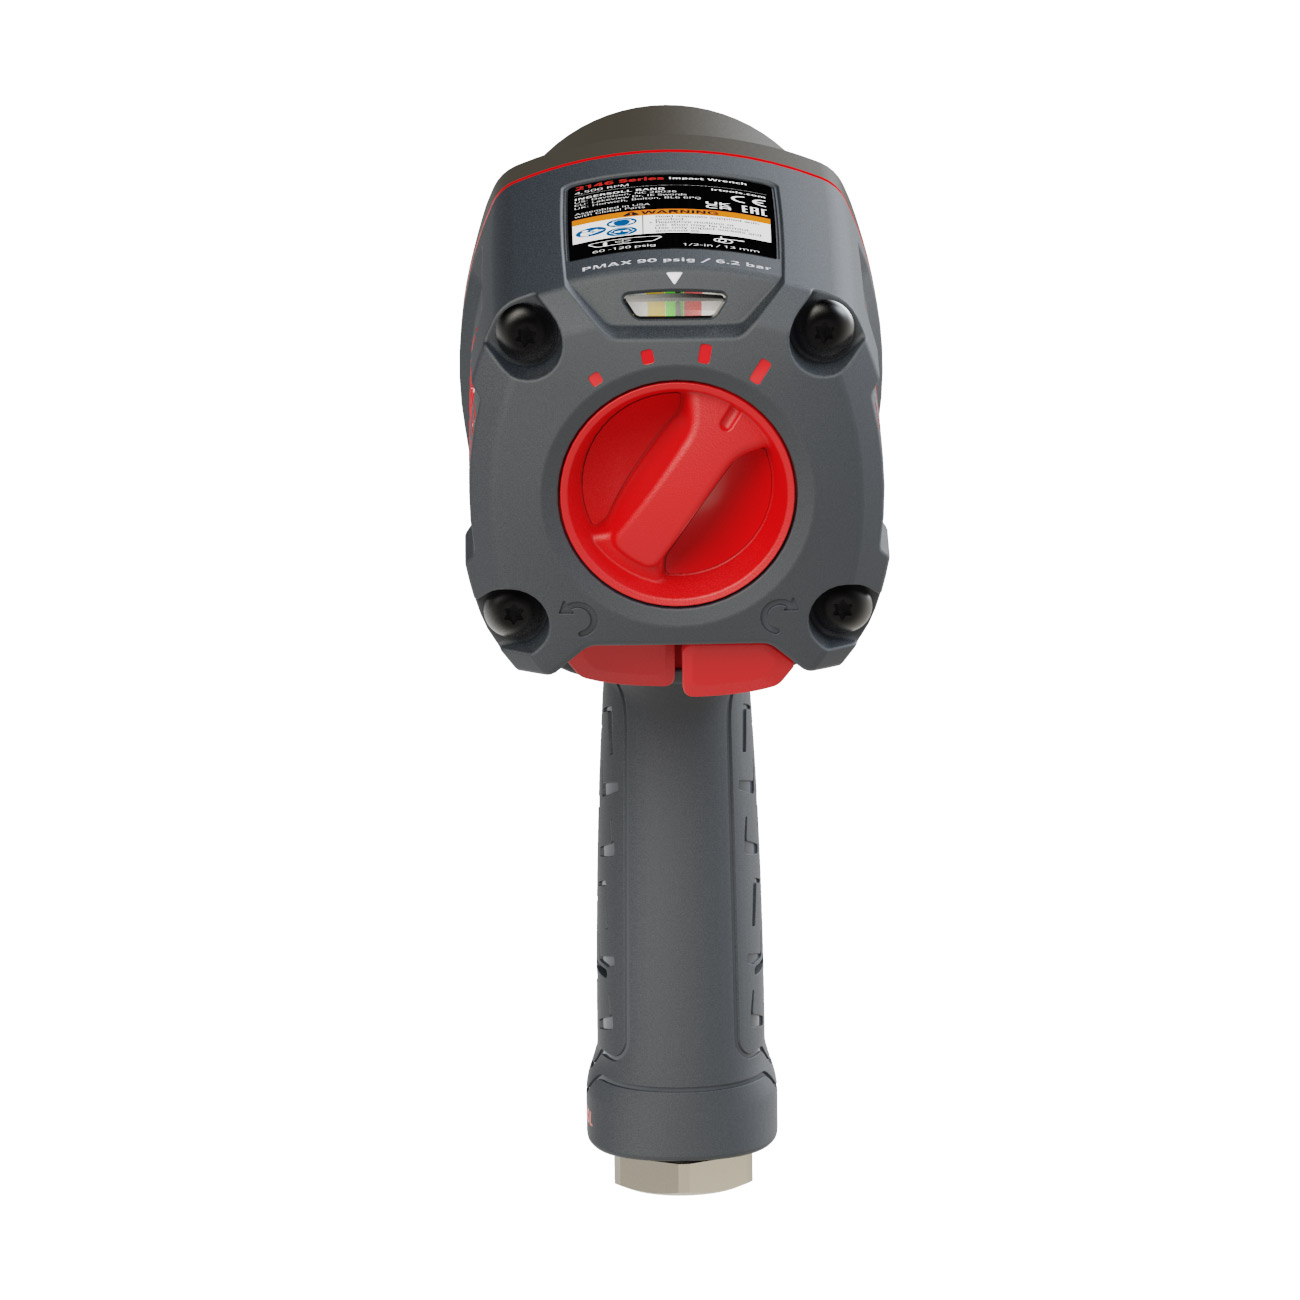 2146Q1MAX 3/4"" Air Impact Wrench - Back view